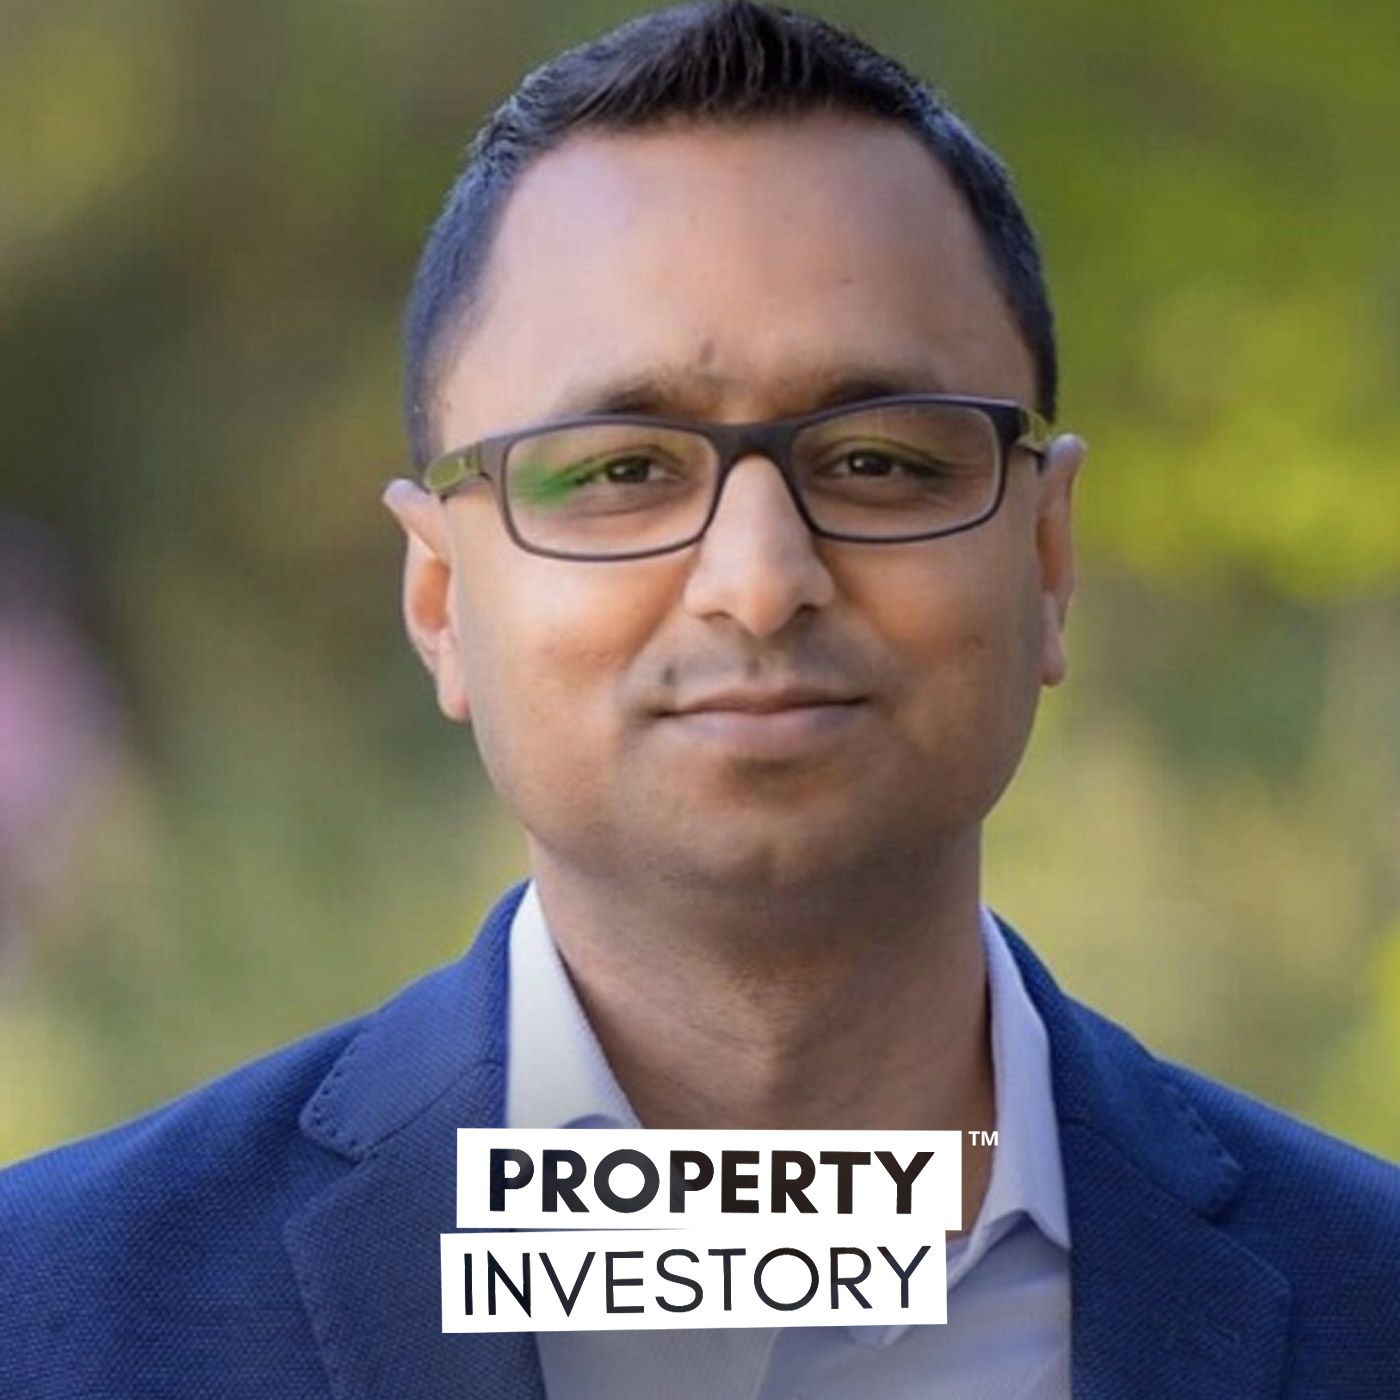 How Investing In Yourself And Education Can Help Build A Successful Property Portfolio With Sanjeev Sah